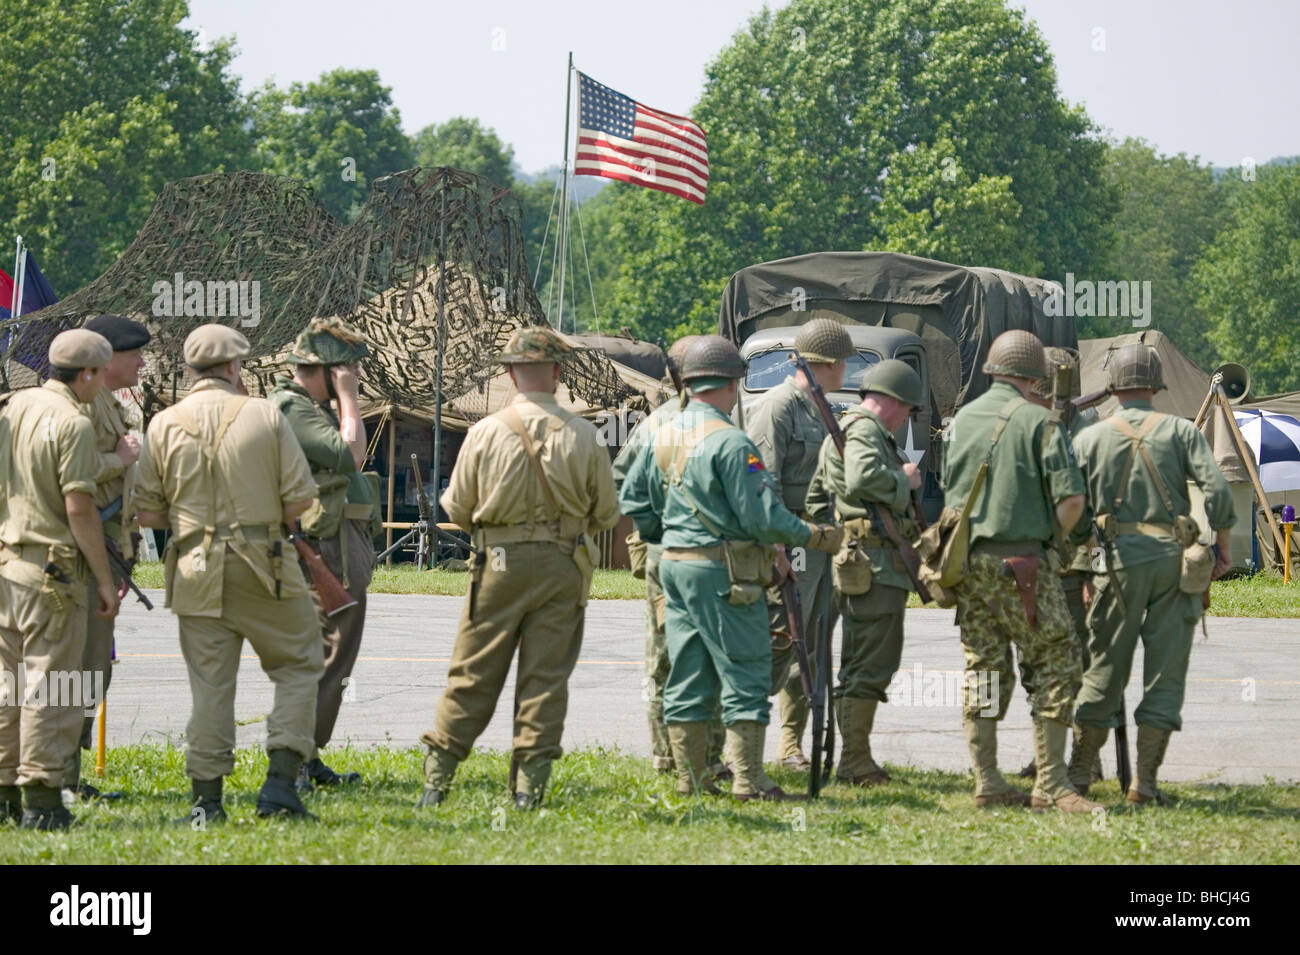 American soldiers with American flag flying in background at Mid-Atlantic Air Museum World War II Weekend and Reenactment in Rea Stock Photo